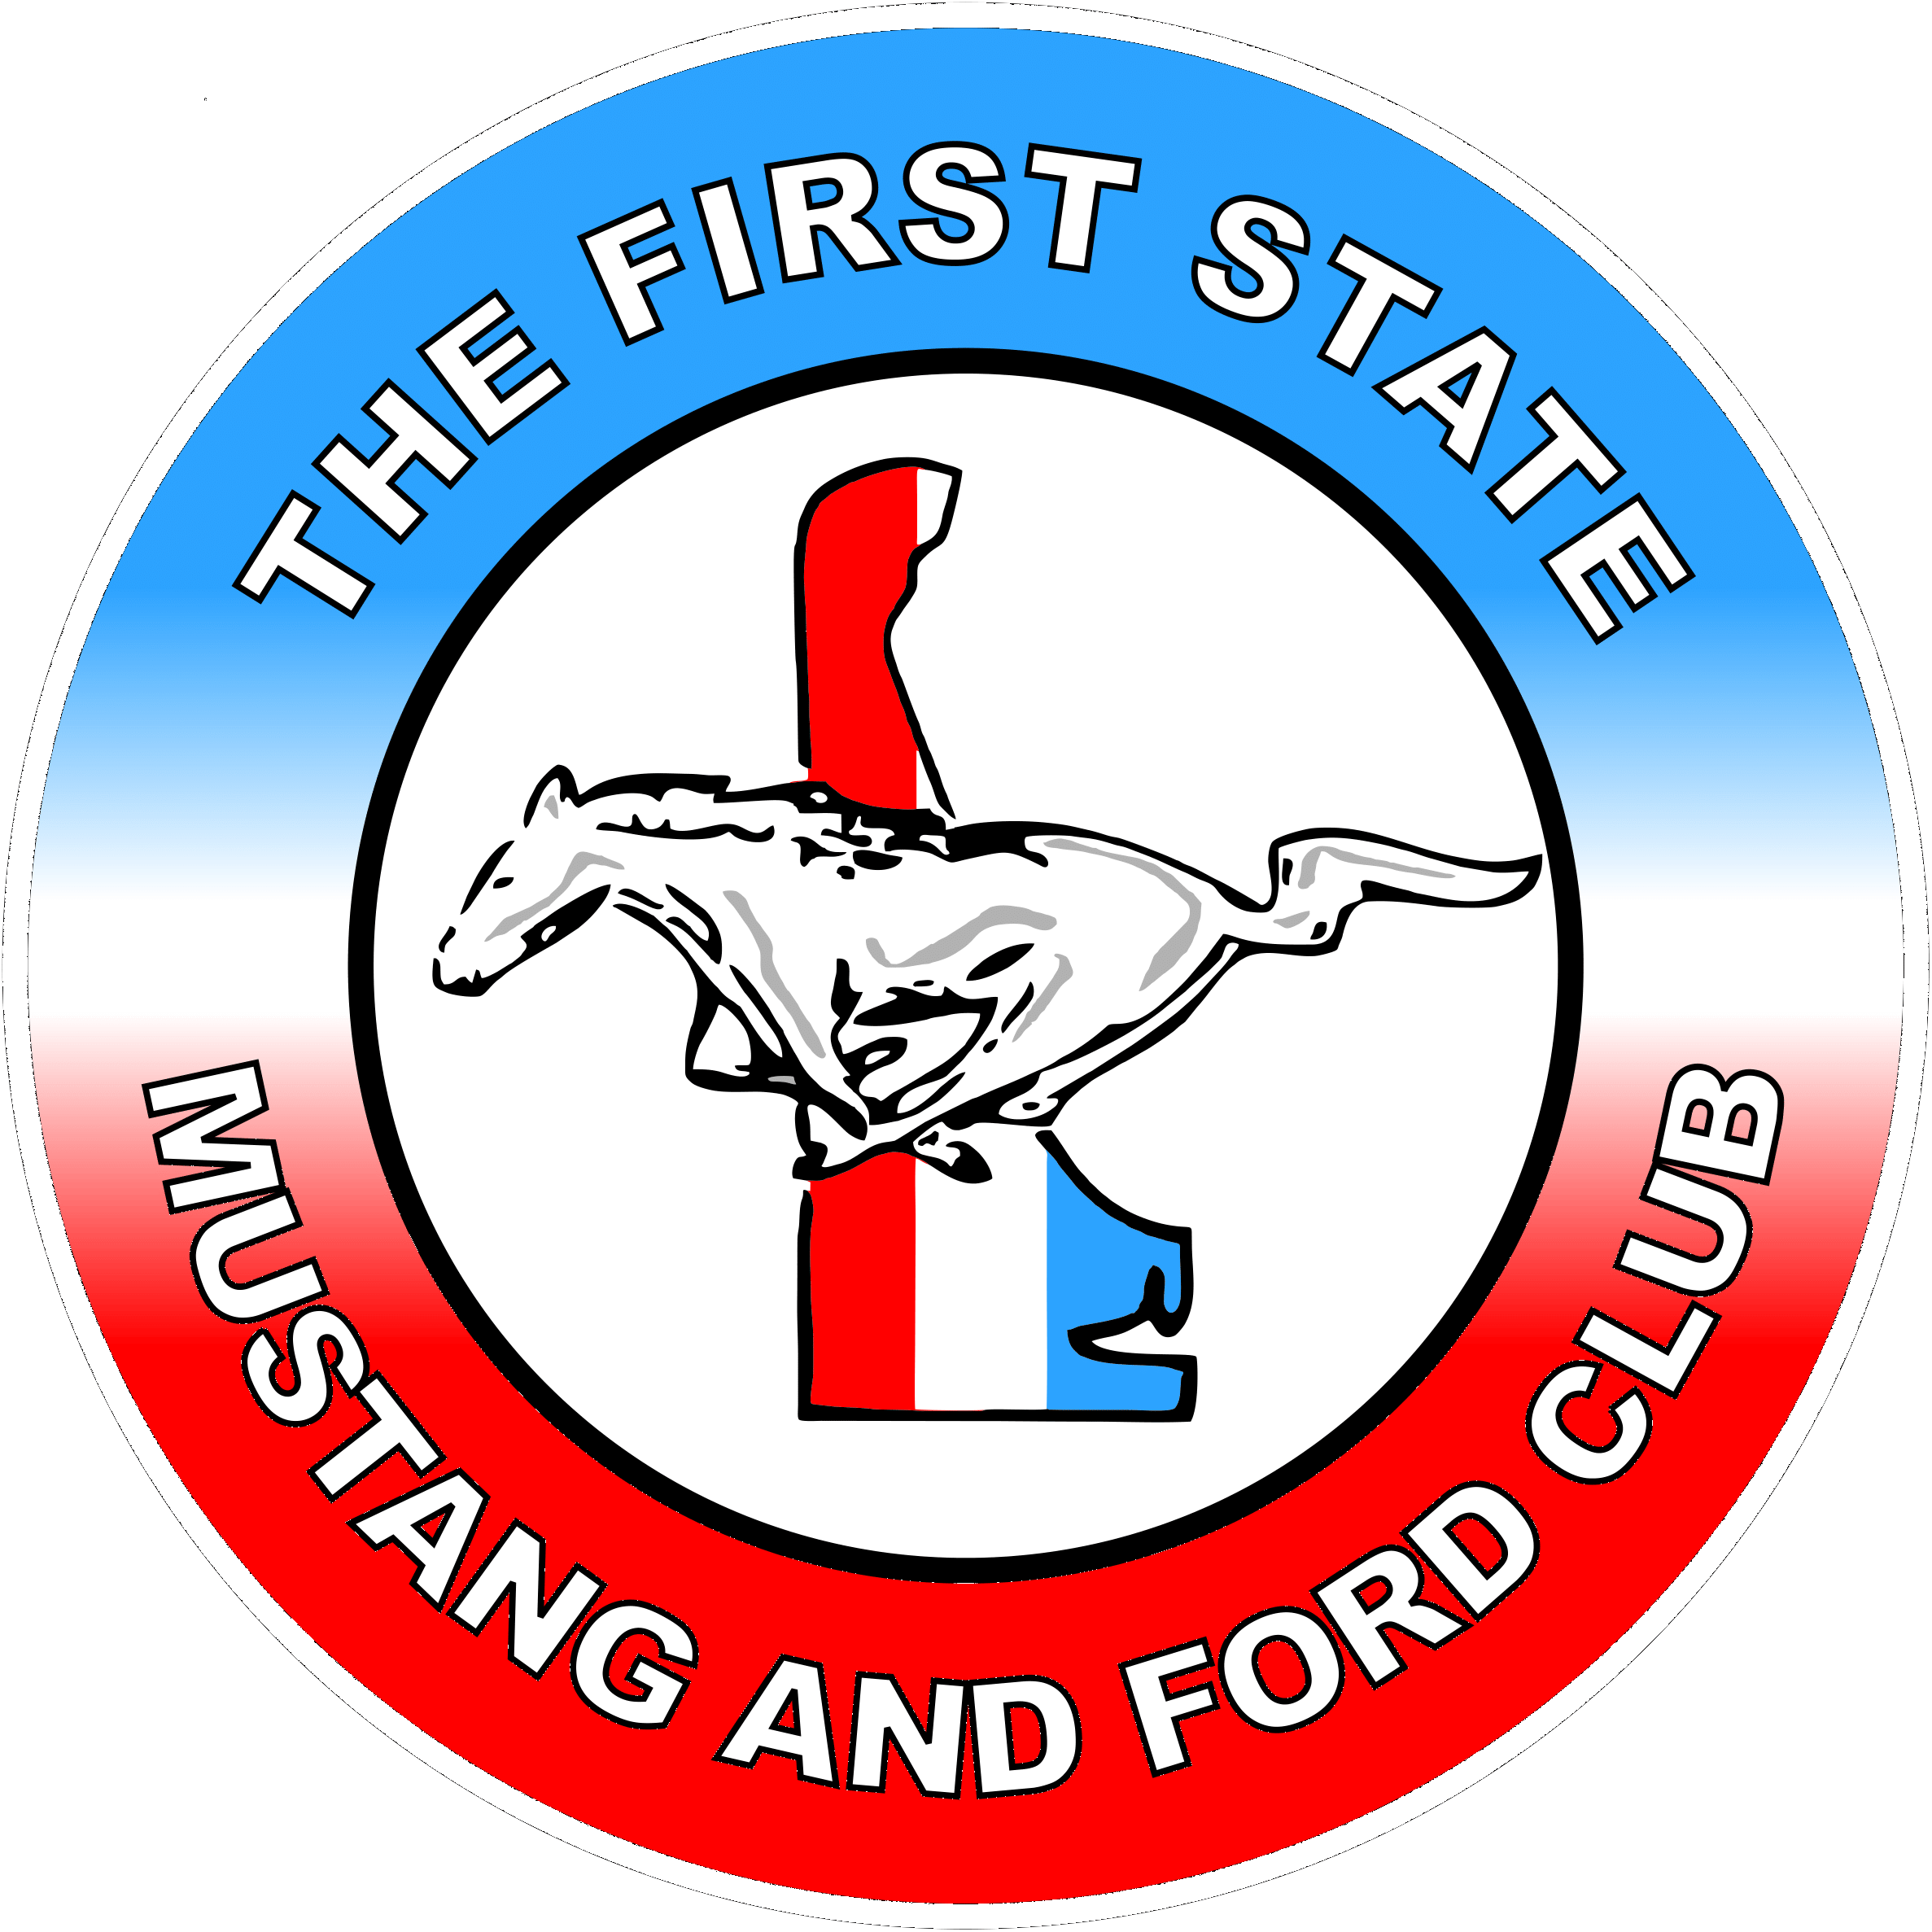 First Ford Logo - First State Mustang and Ford Club